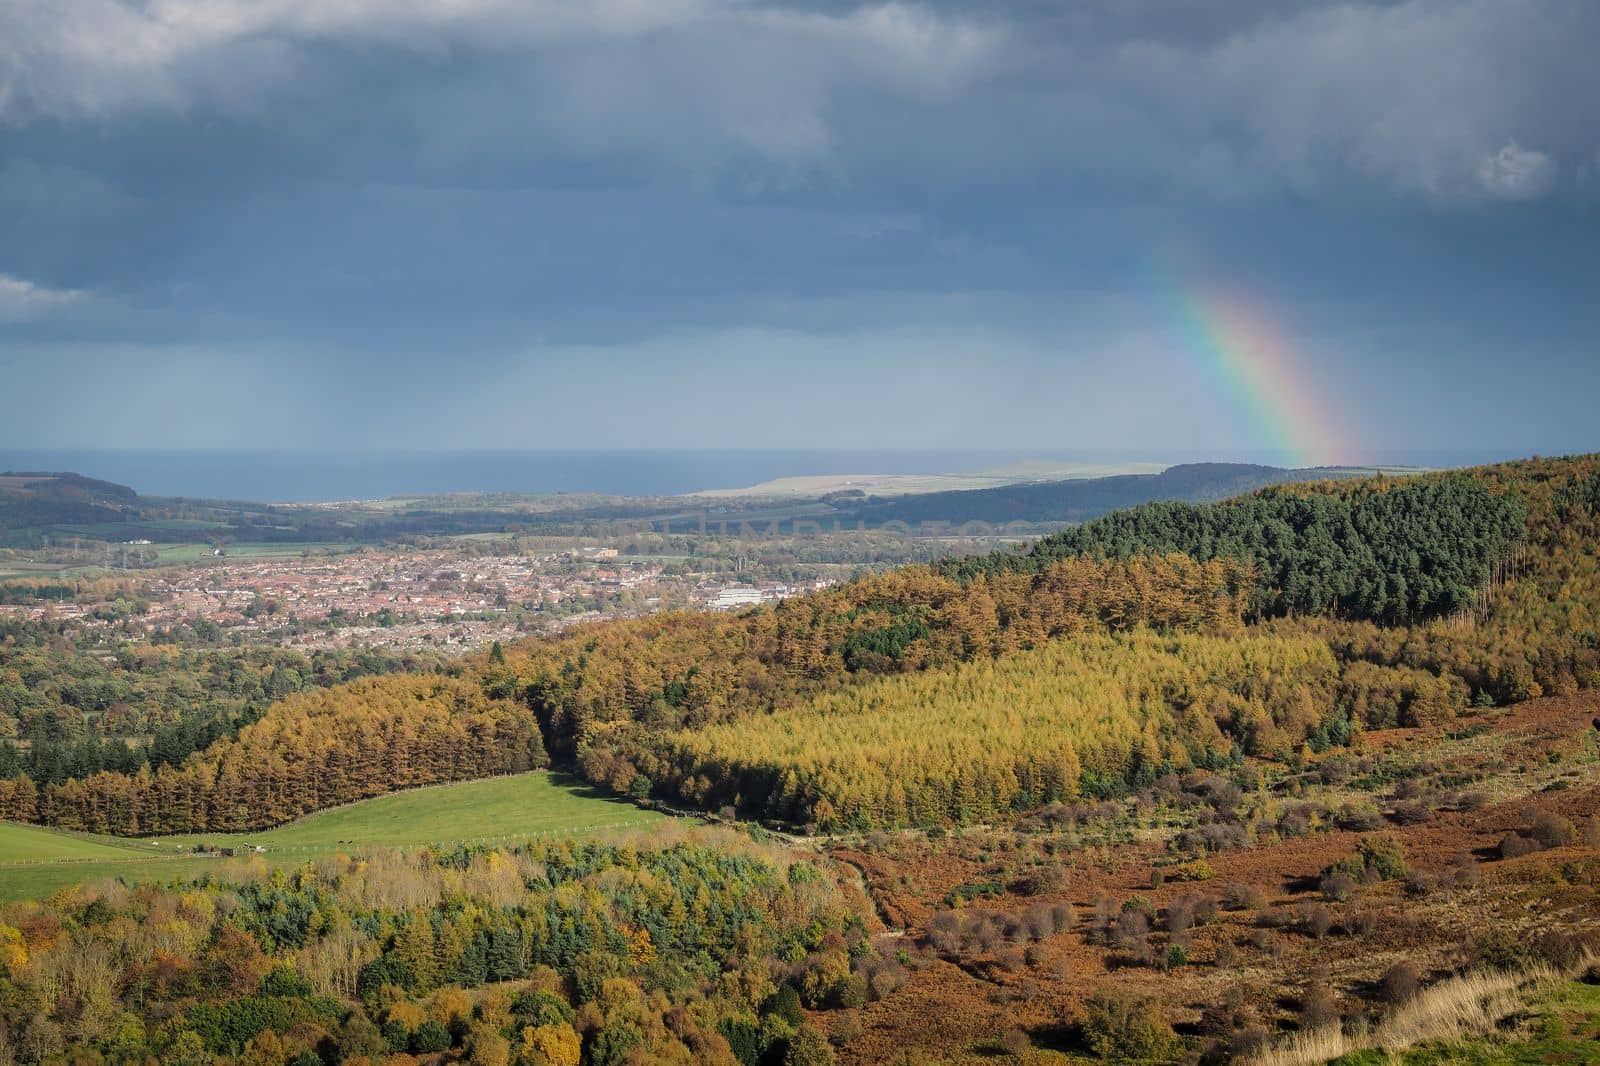 View from the summit of Roseberry Topping, Yorkshires Matterhorn, with a rainbow arcing over Guisborough under a moody sky, North York Moors National Park, UK